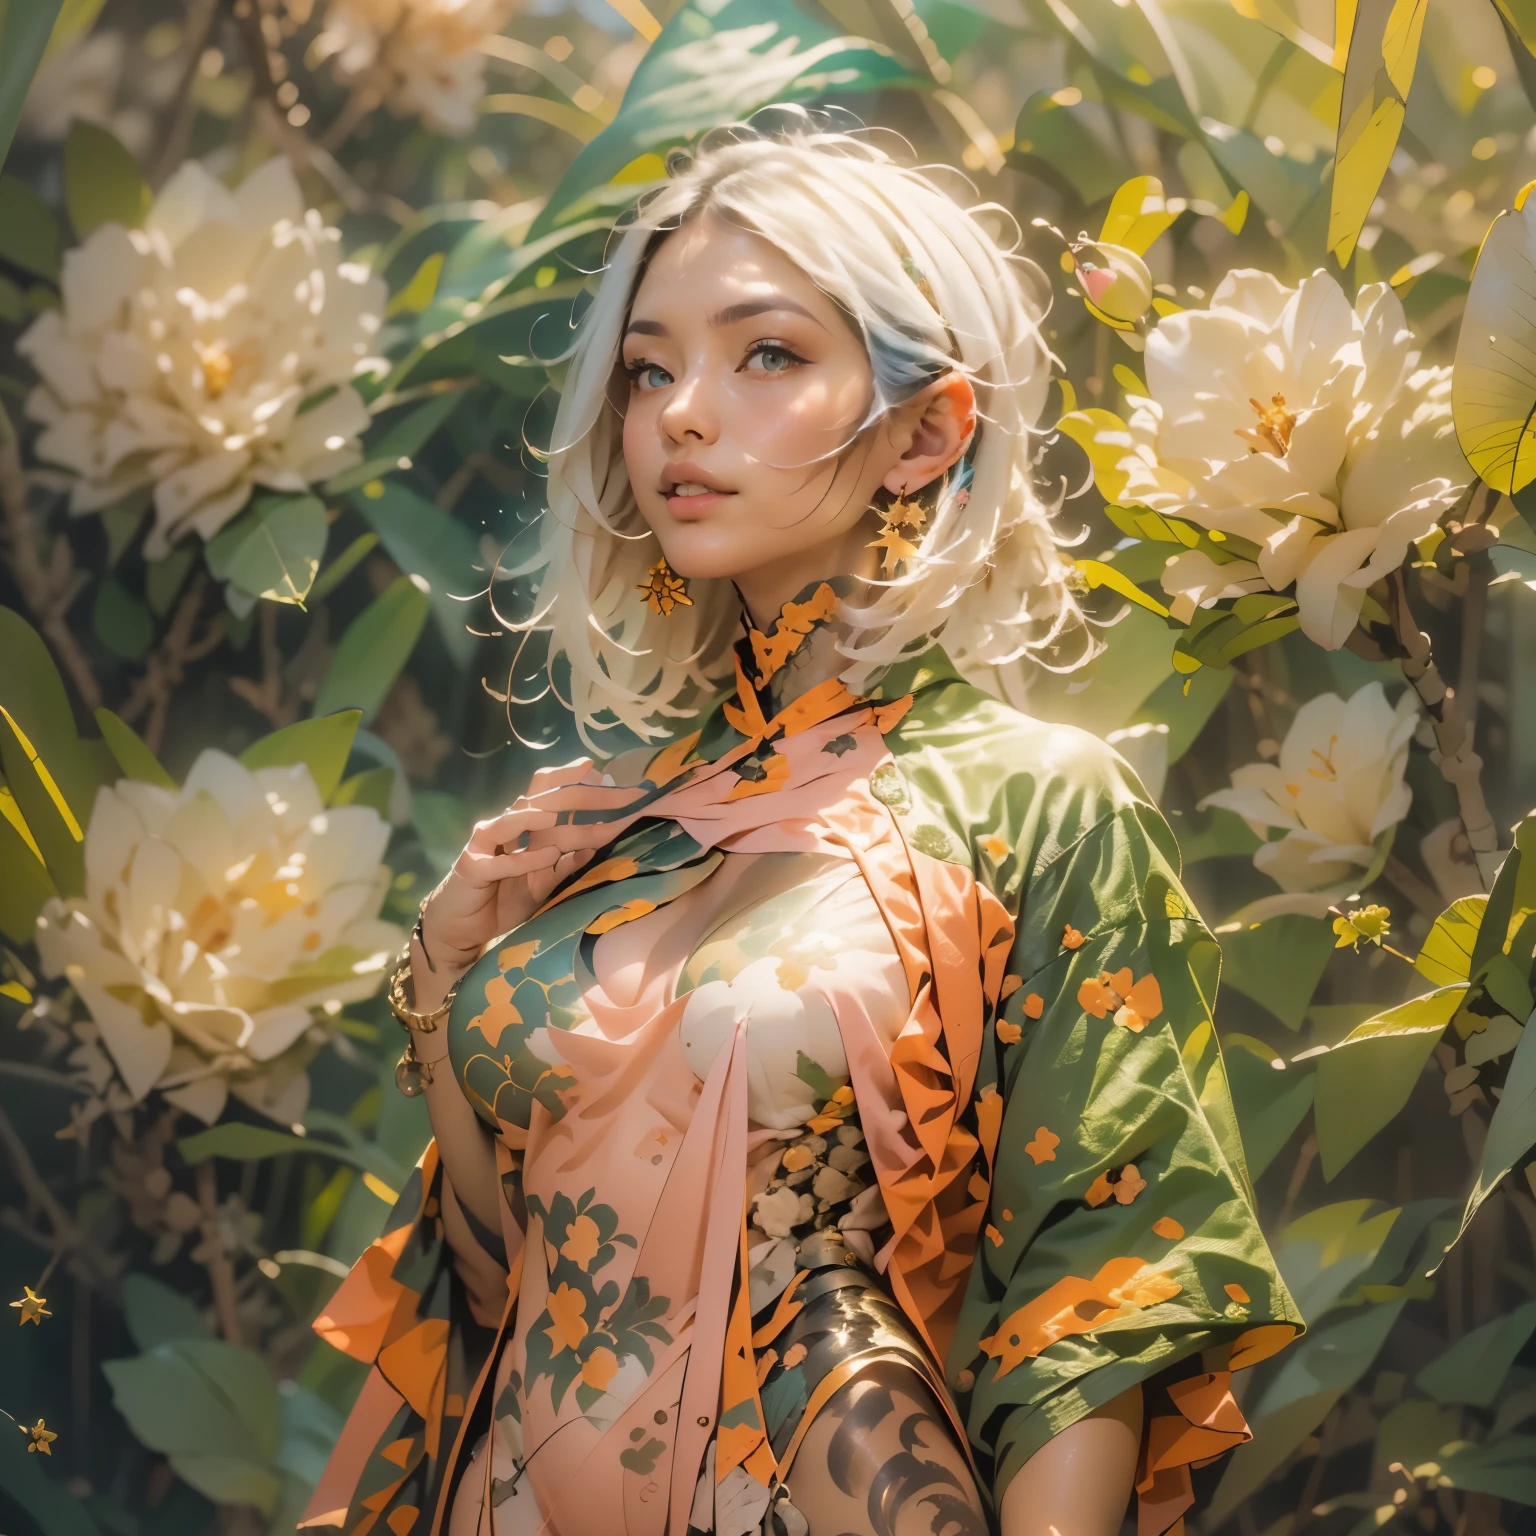 (Realistic Painting), (Best Quality, High Resolution, Photo Realistic: 1.37), (Vivid Colors), (Studio Lighting), (Orange, Pink, White, and Green Details), (Woman with White Hair), (Tattoos), (Technological clothing: 1.1), (Abstract background with lines and circles). ((best quality, high resolution, clear image, detailed background, girl, flower-t tattoo, starry sky)). ((Best quality: 1.37), (1 girl - solo, full-length, waist-high, loose - relaxed pose, standing), (fashionable pink dress, technological image)). ((Settings, soft light, shadows). (tech background - abstraction) HD detail, cinematic, surrealism, Soft light, Deep focus, ray tracing, Diffusion.